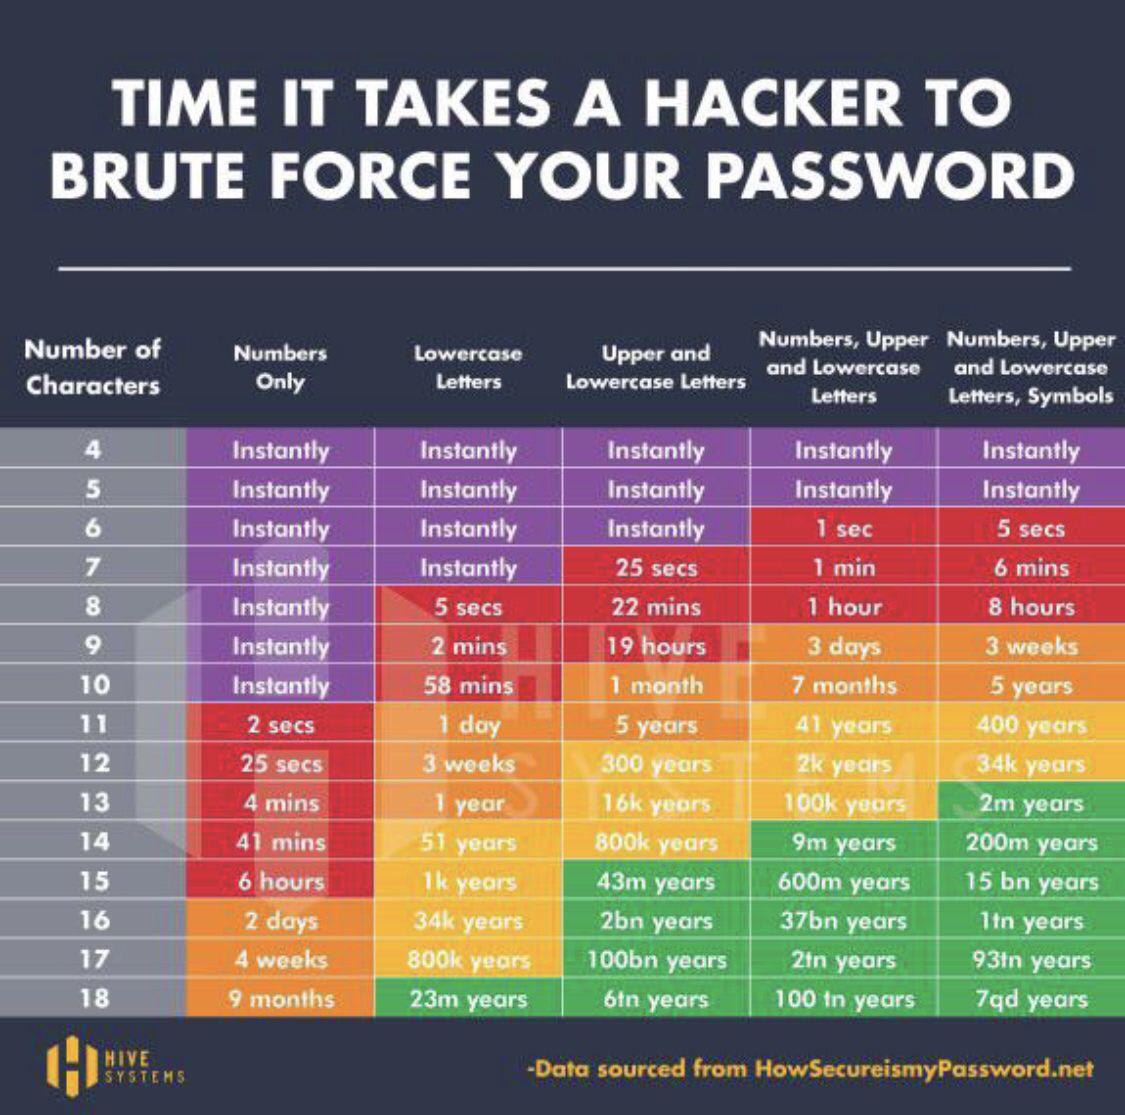 How long it takes to hack your password!